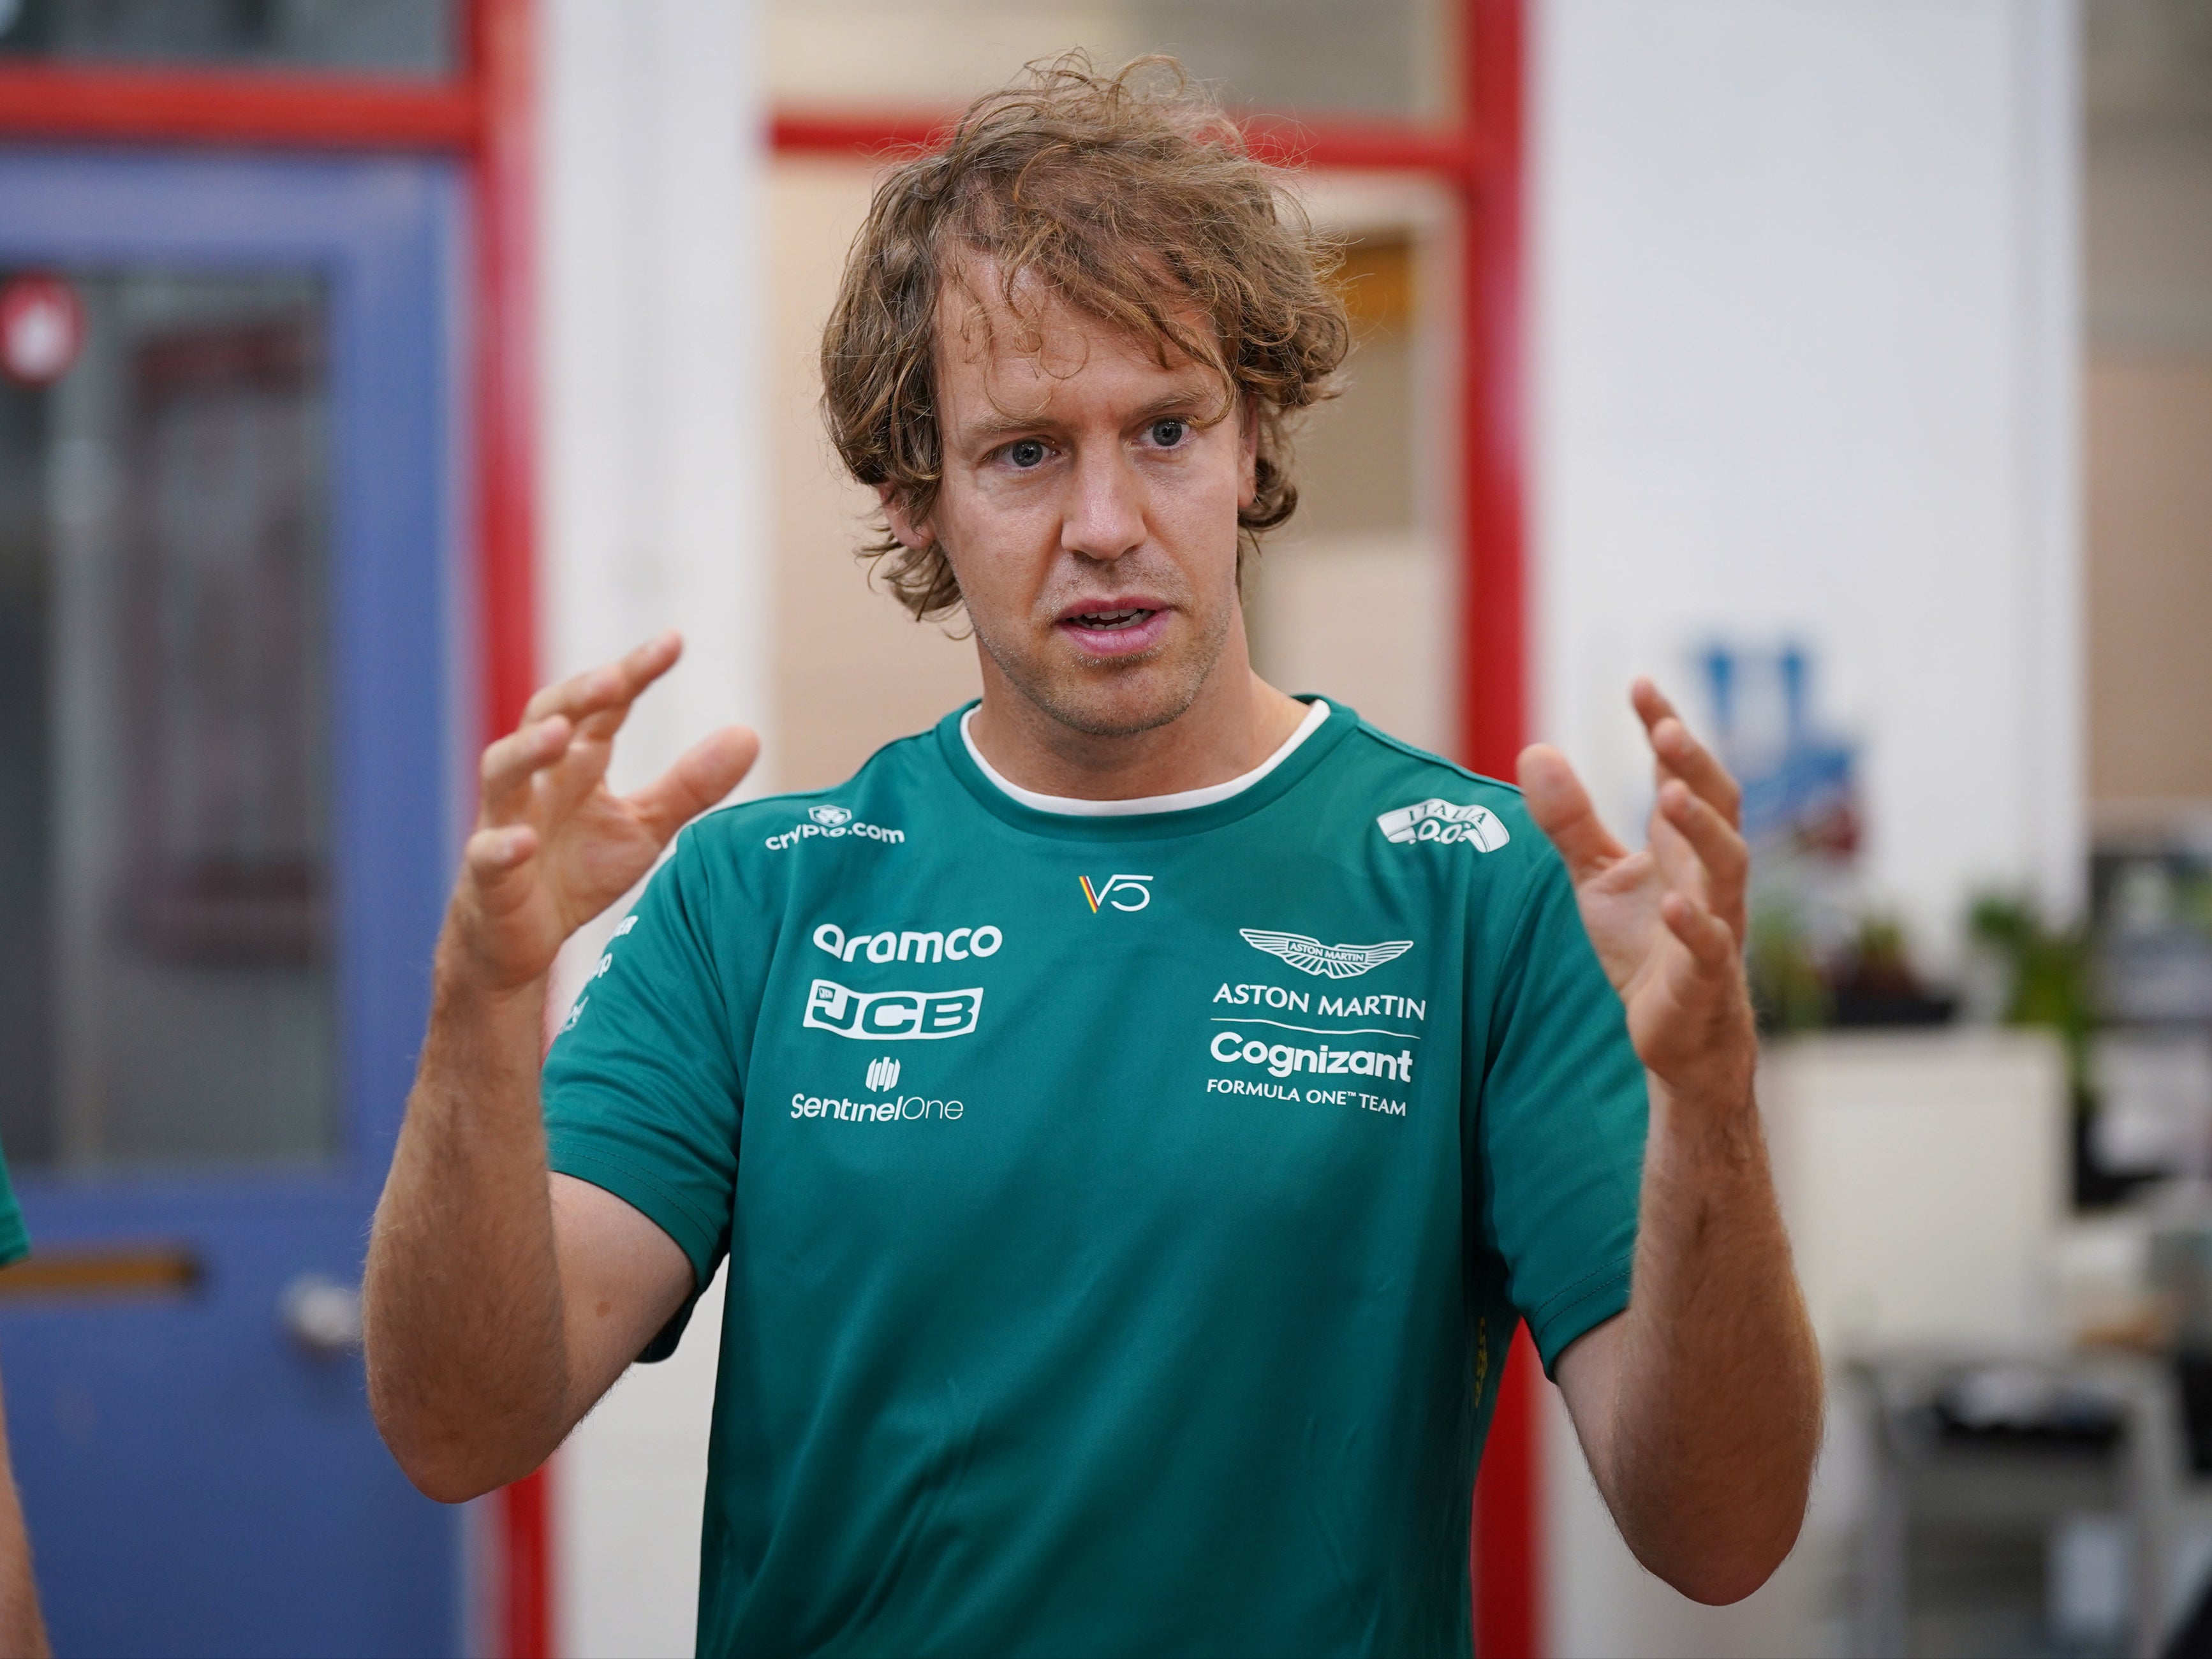 Vettel said he is a ‘hypocrite’ for dovetailing his environmental campaign while continuing to race in F1